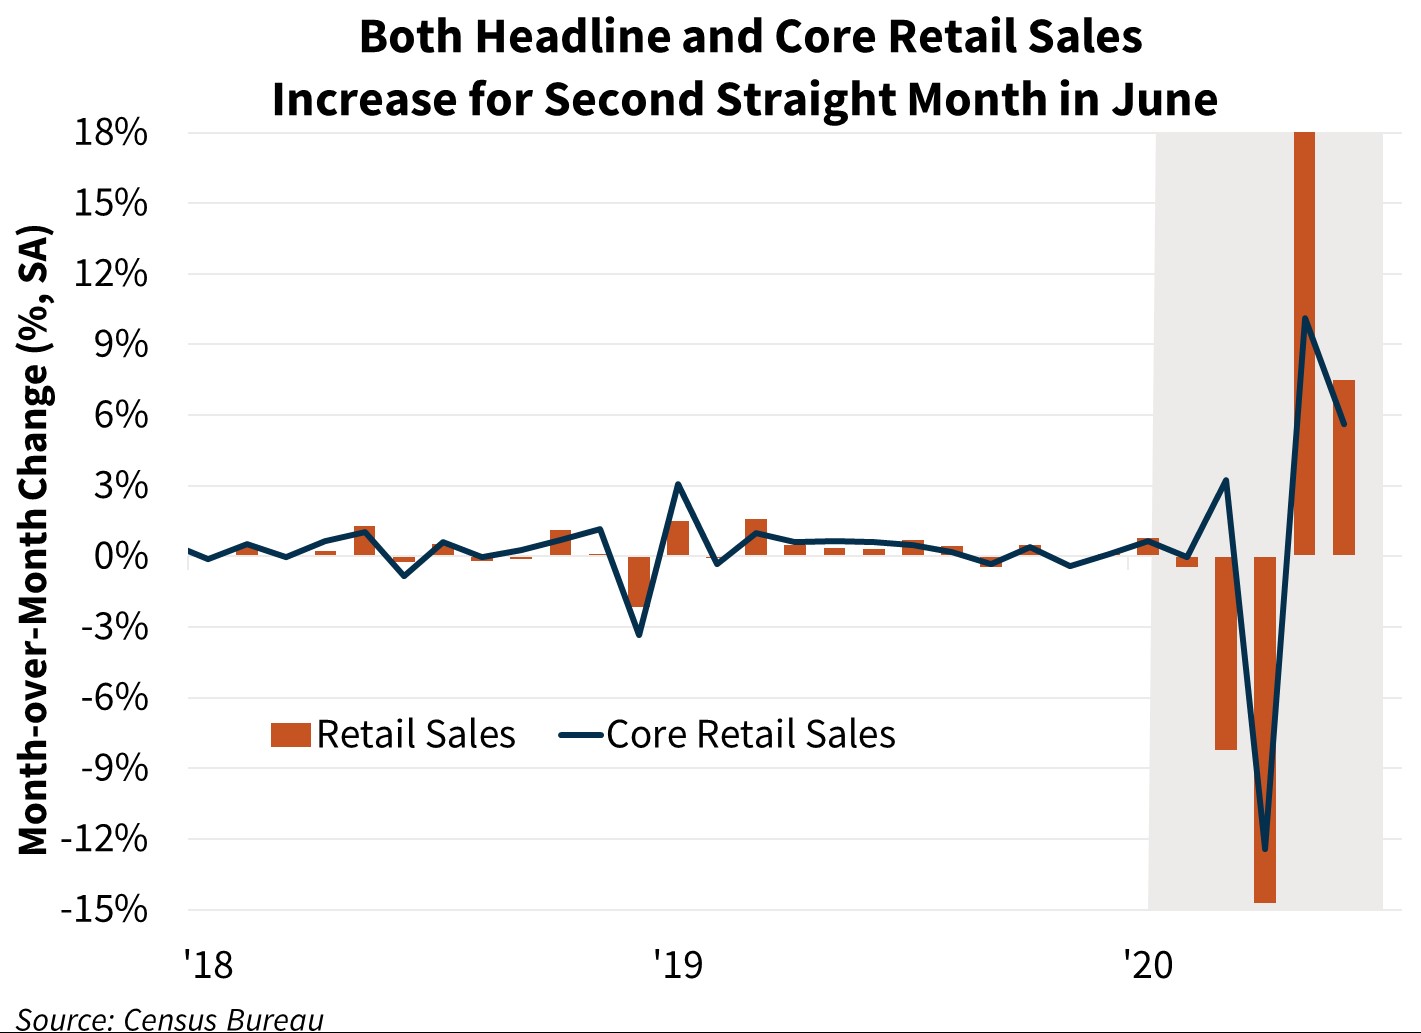  Both Headline and Core Retail Sales Increase for Second Staright Month in June